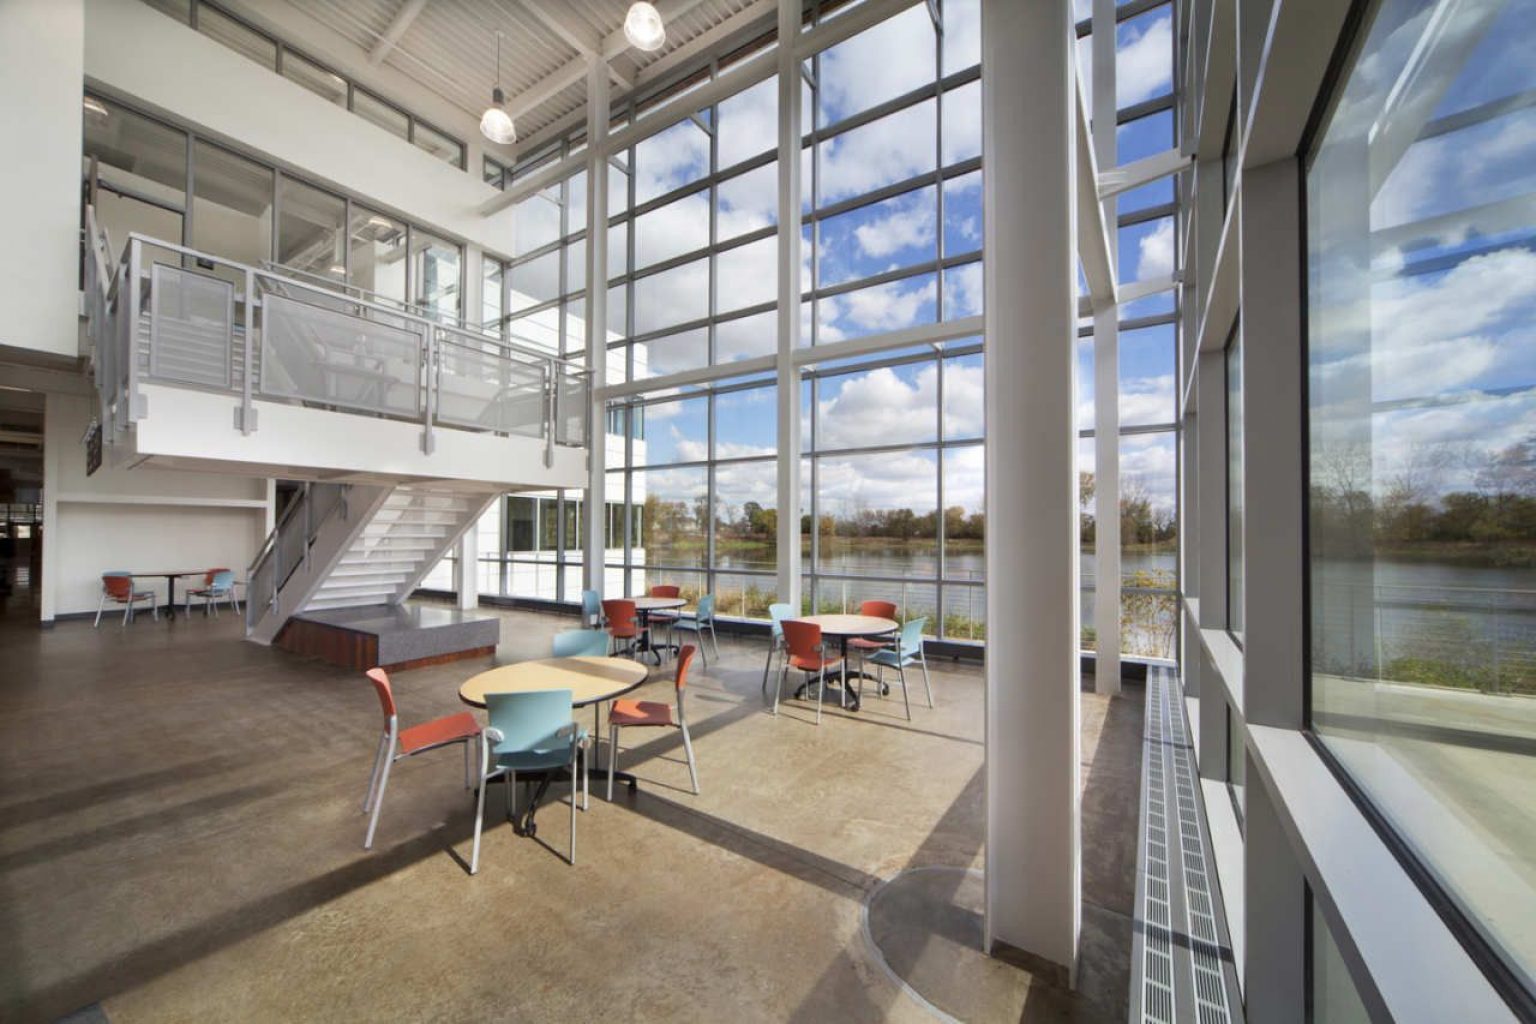 Waubonsee Community College Plano Classroom Building | Holabird & Root ...